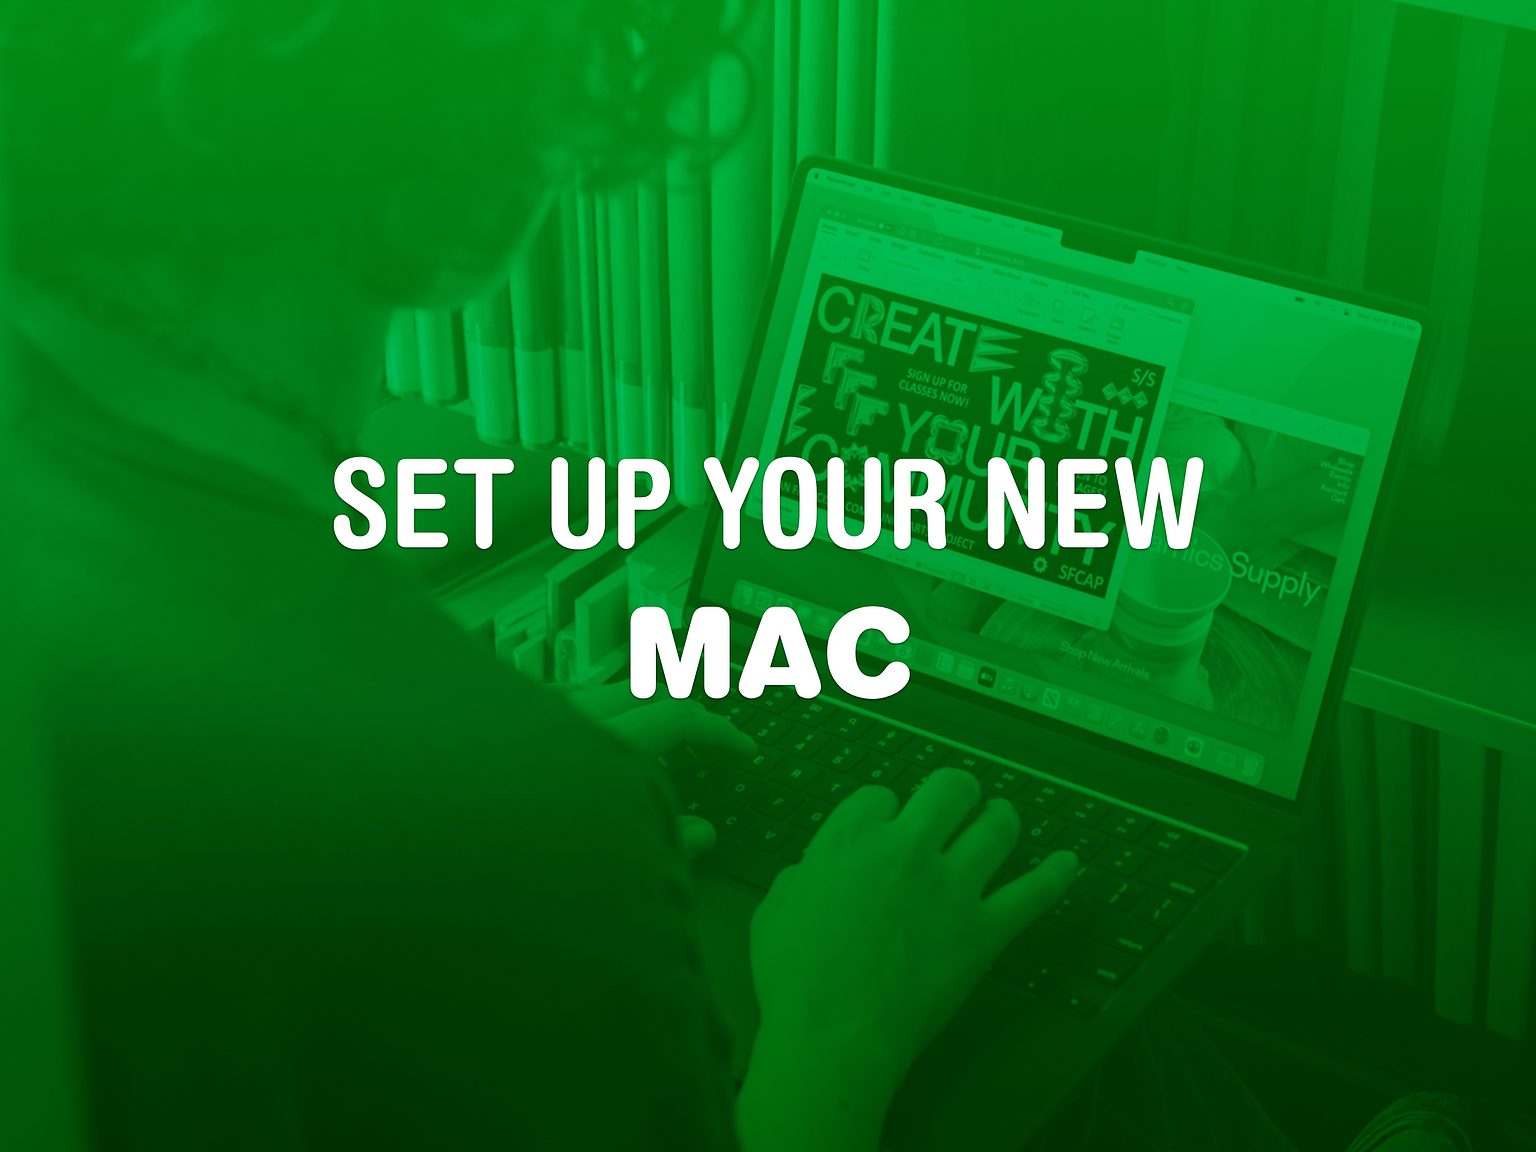 Set Up Your New Mac: Moving to a new Mac is fast — we’ll get your Mac on track in no time.